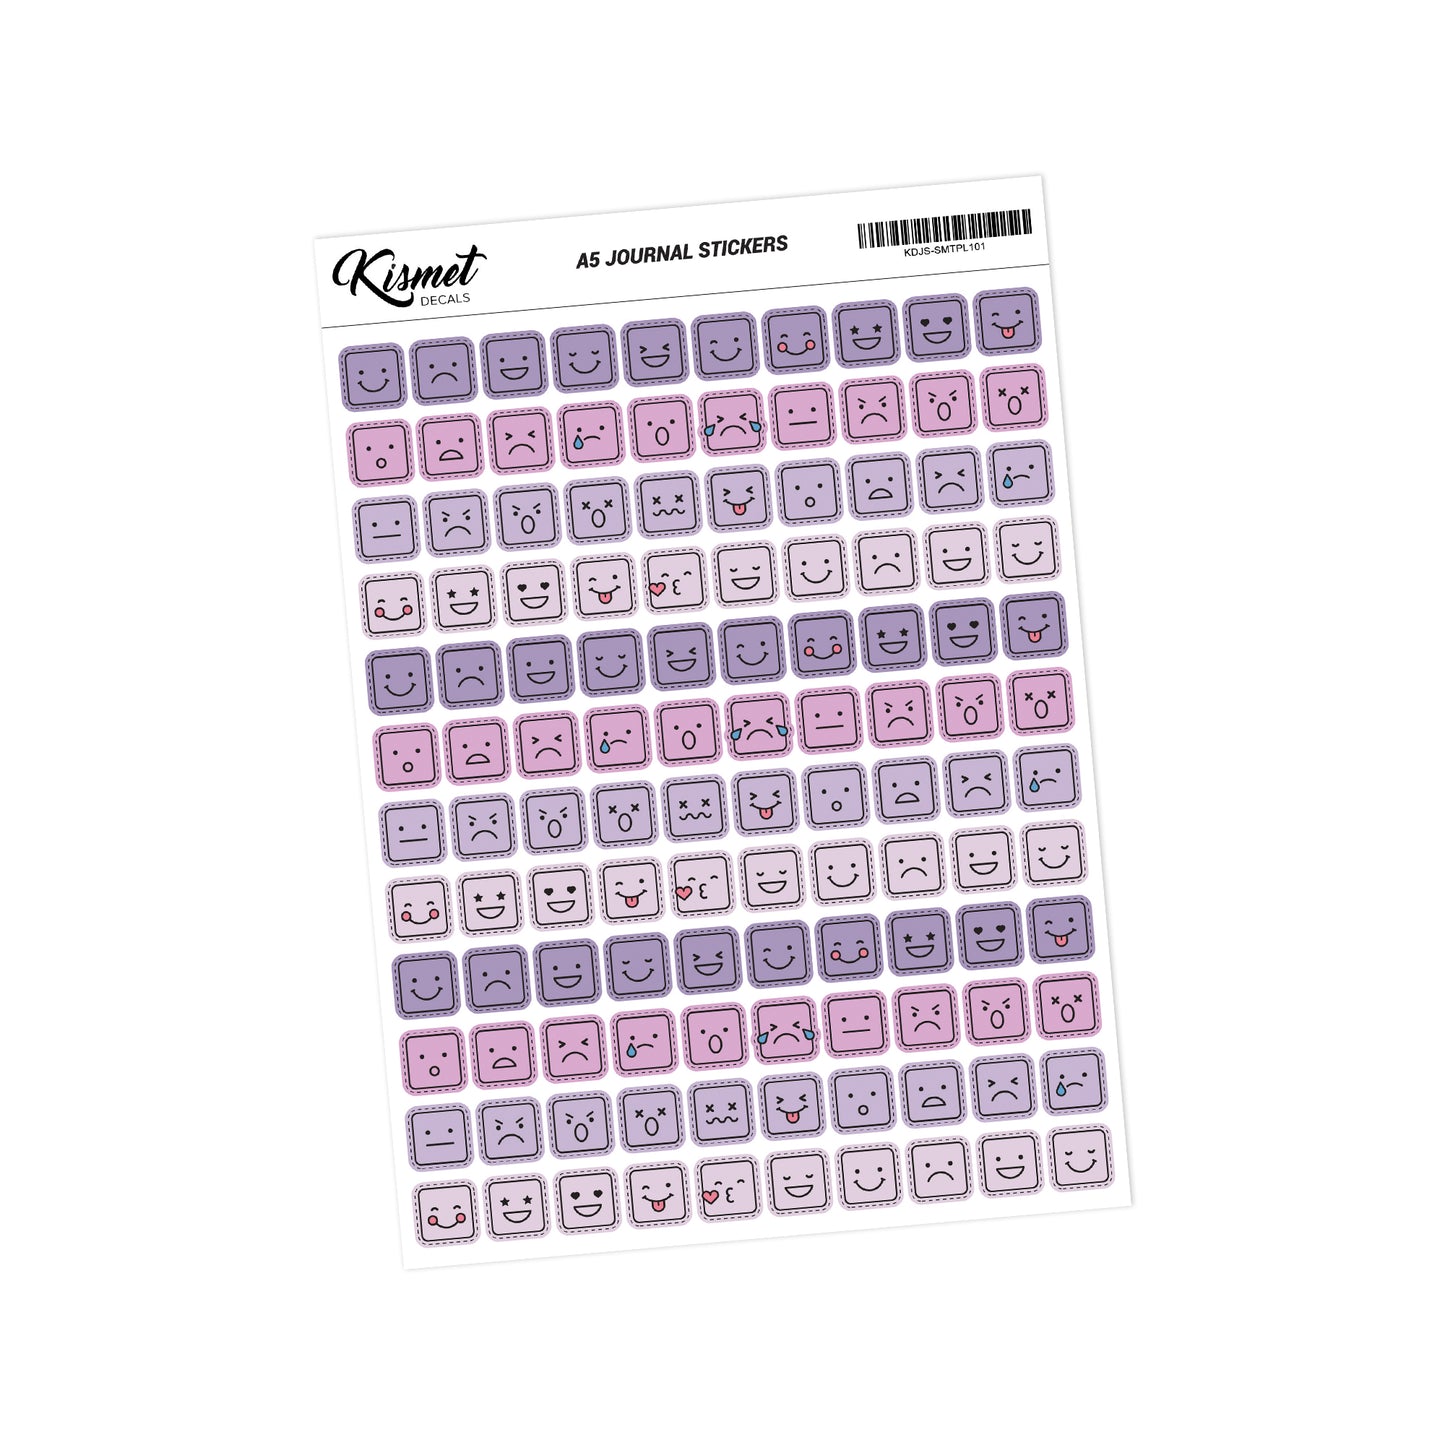 A5 Square Mood Tracker Stickers - 120 Pieces 5.3" X 8.3" - Craft Journal Snail Mail Planner Journal Diary Paper Sticker Sheet